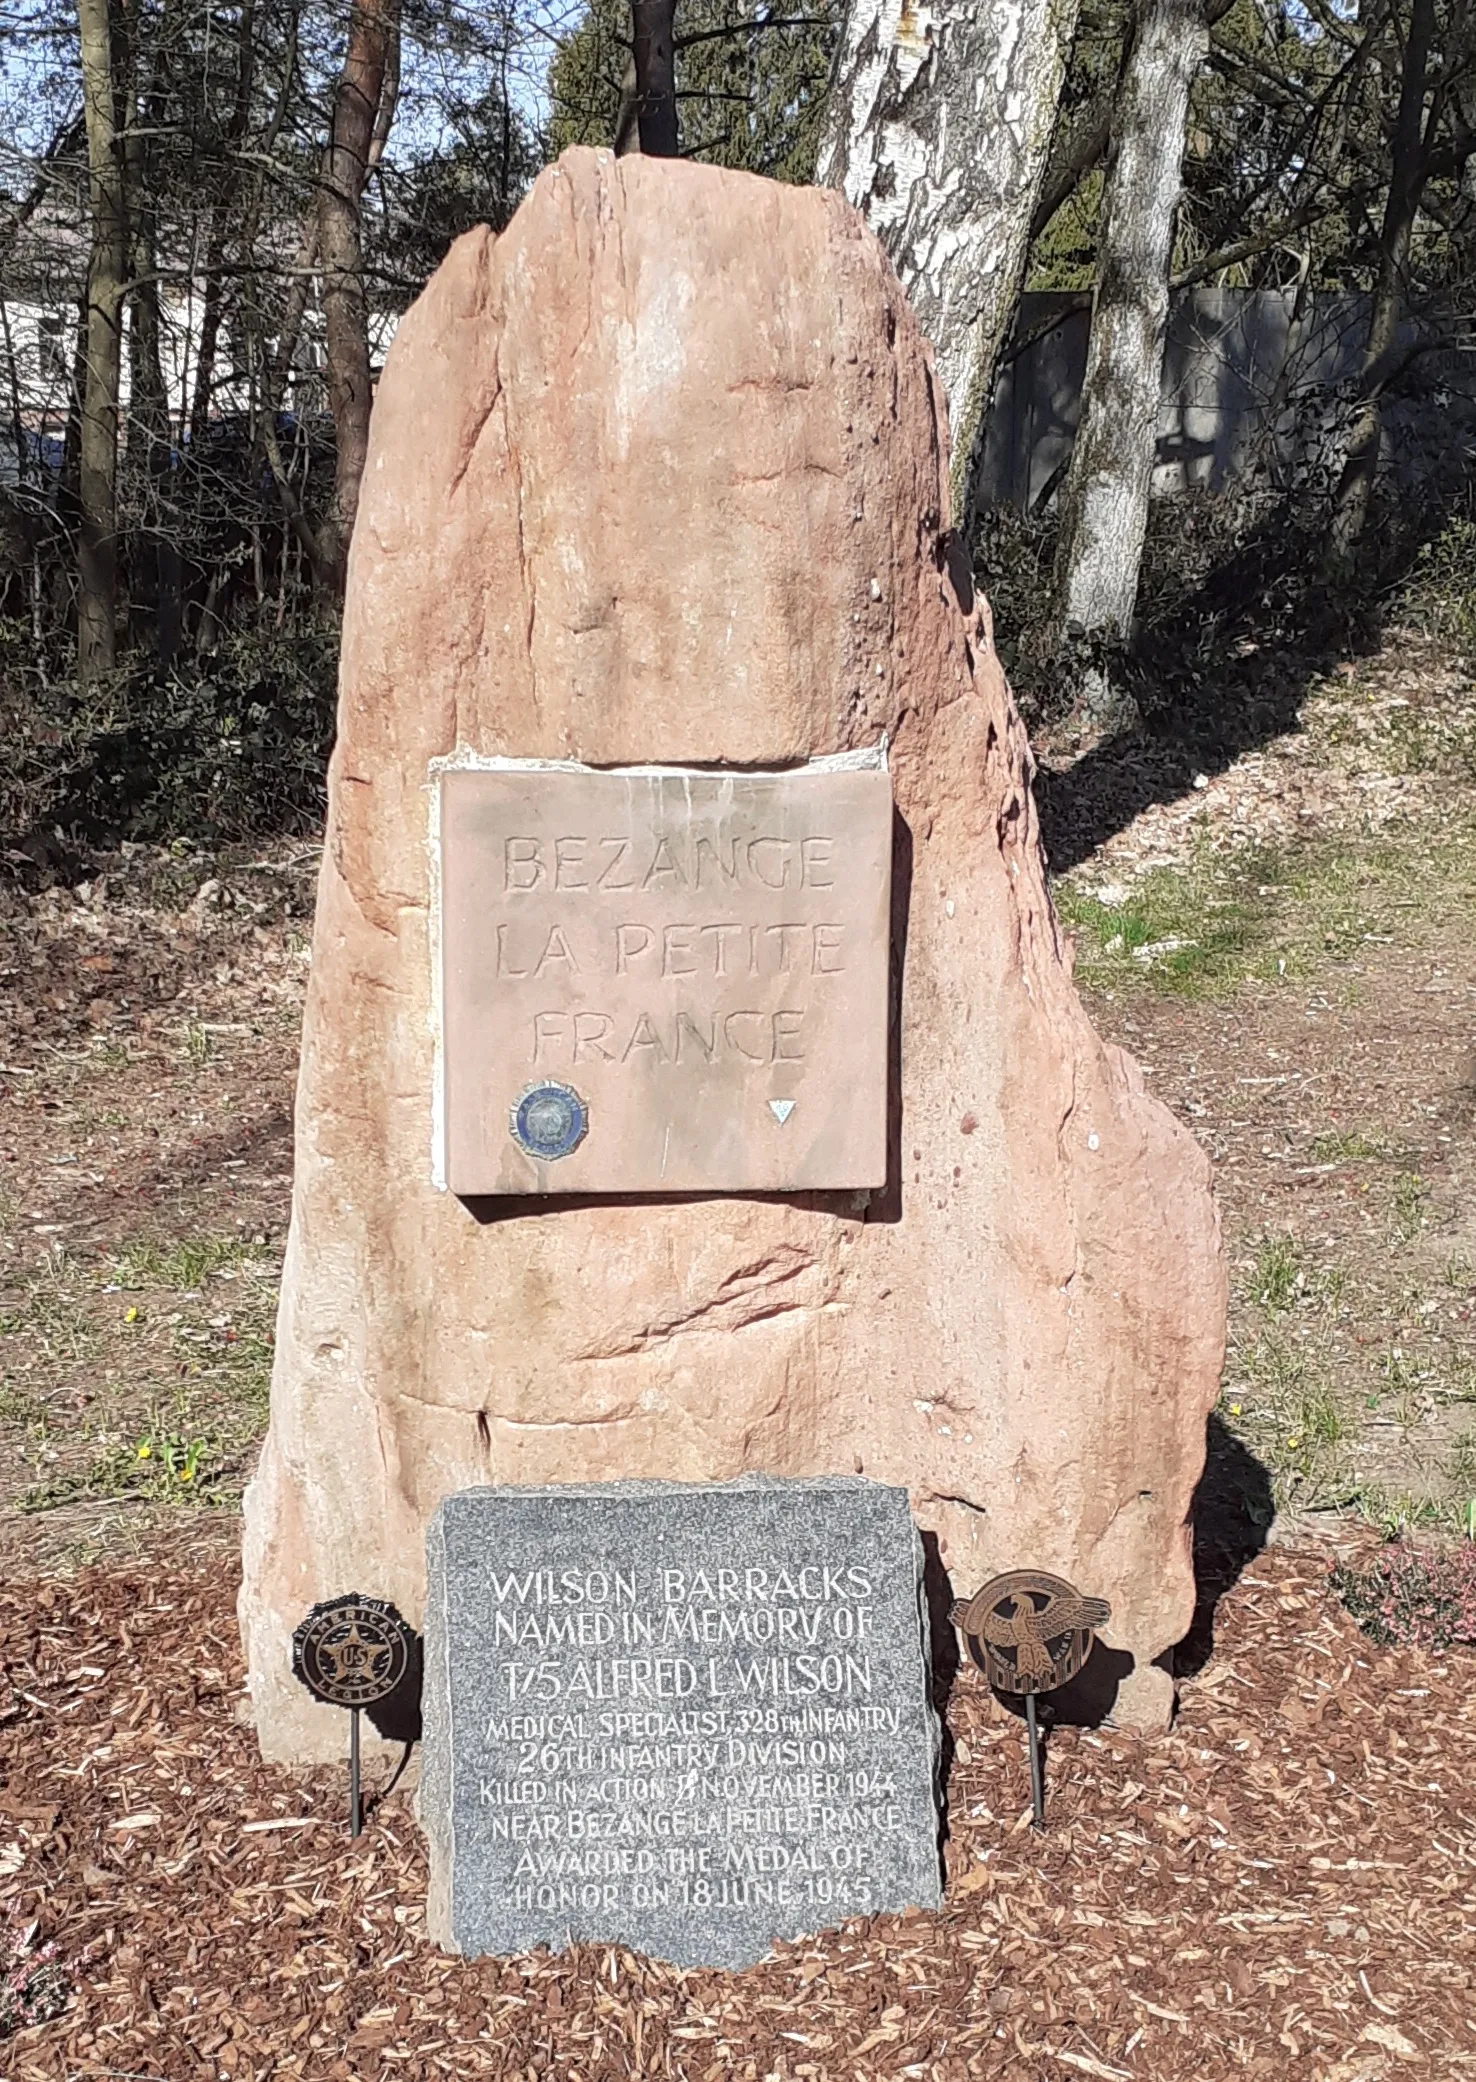 Photo showing: The Bezange la Petite Marker is a sandstone plaque located at Wilson Barracks in Landstuhl, Germany. It commemorates World War II Medal of Honor recipient Technician Fifth Grade Alfred L. Wilson, Medical Detachment, 328th Infantry, 26th Infantry Division. Wilson, for whom the barracks is named, was killed in action near Bezange la Petite, France.